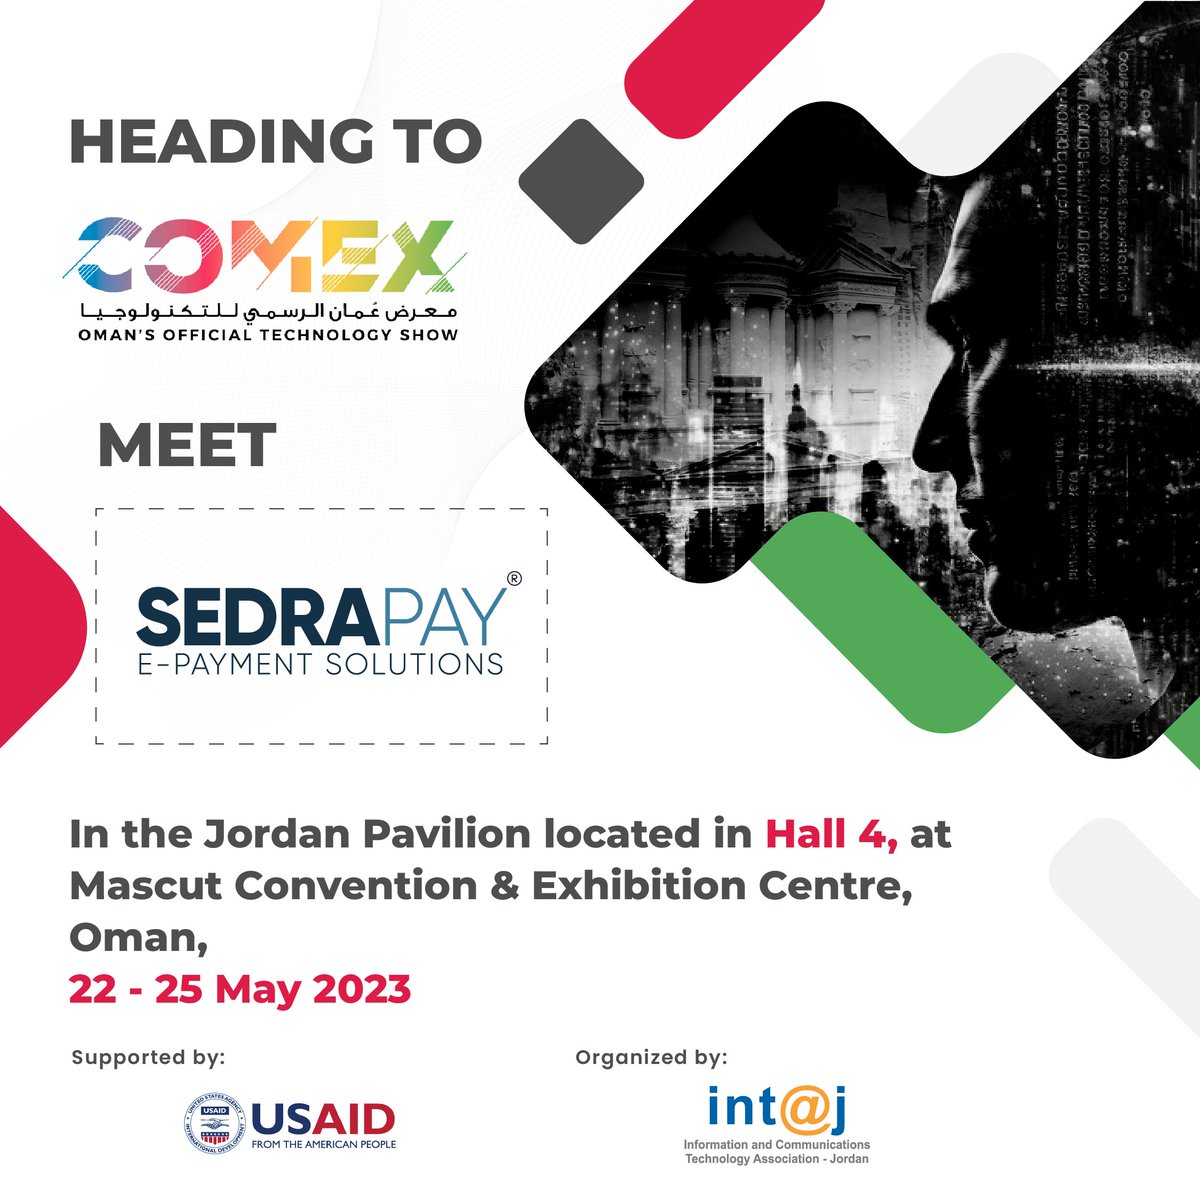 Meet #Sedra_for_ePayment_Solutions in #Comex_2023 within the #JordanPavilion located in Hall4 @OmanConvention to discover the company #innovative_services & #smart_solutions

This activity is supported by the #USAID_Business_Growth_Activity

@comexglobalex
#Technology #Innovation